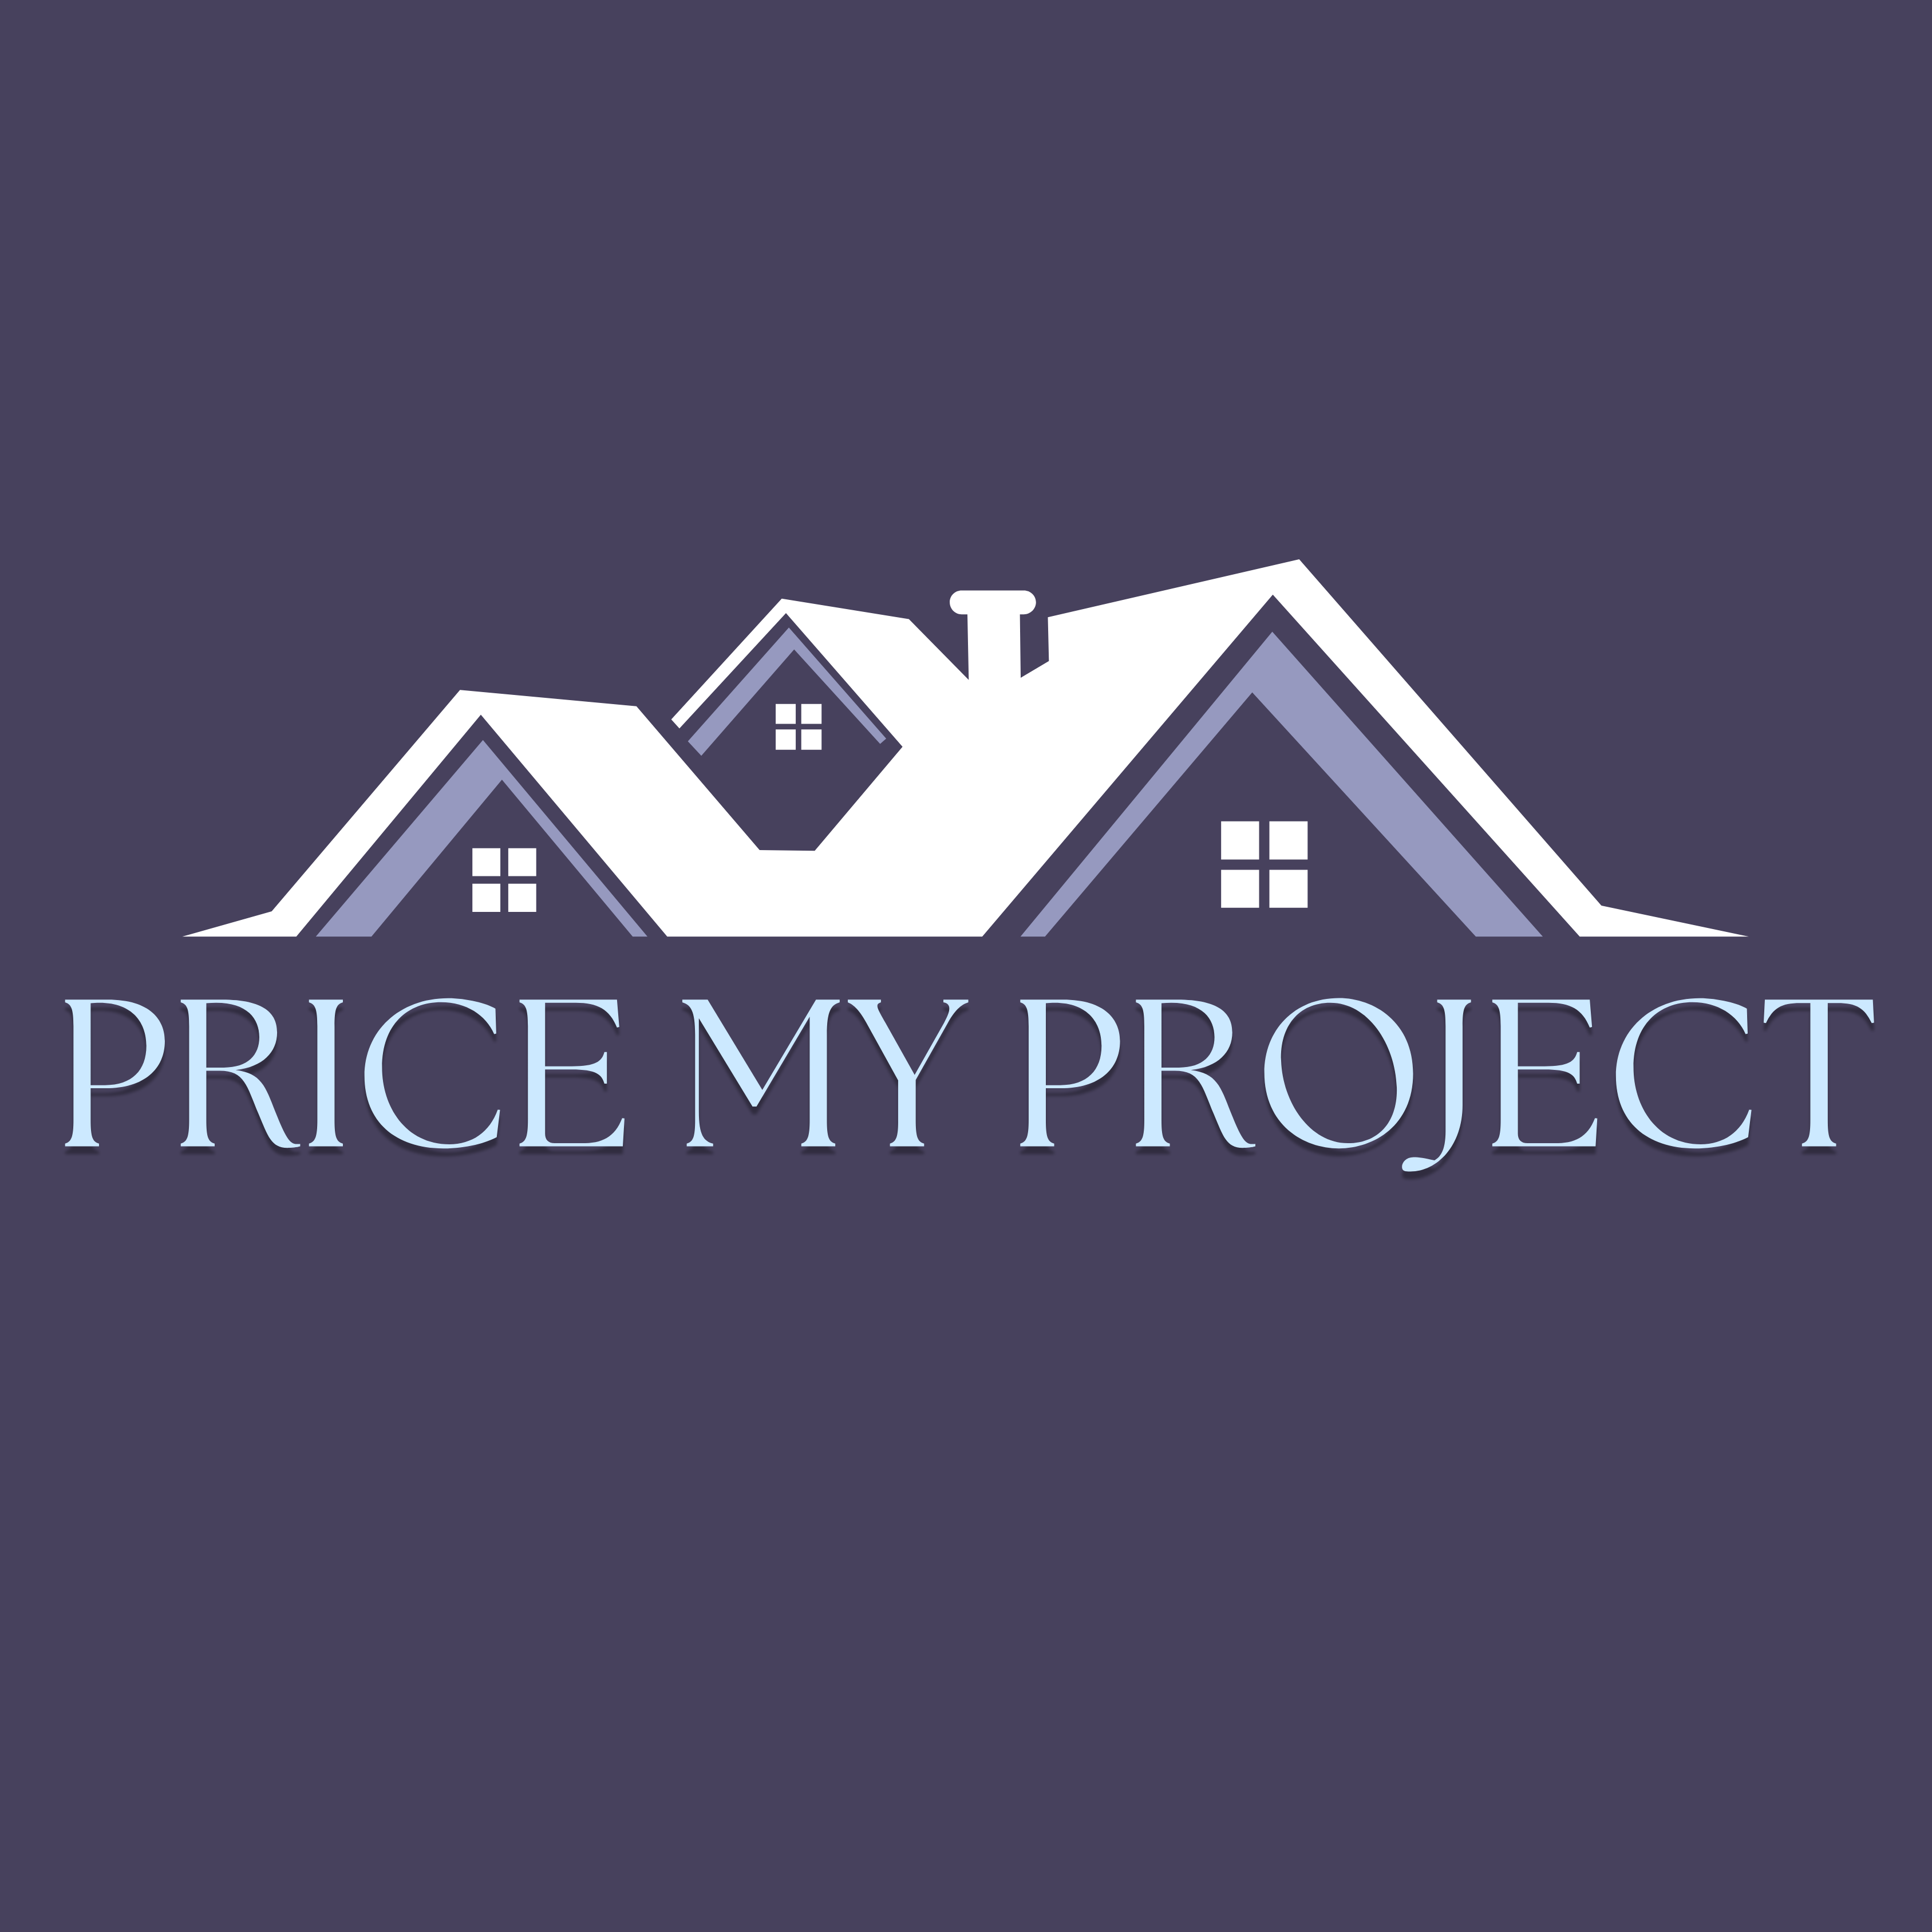 Price My Project